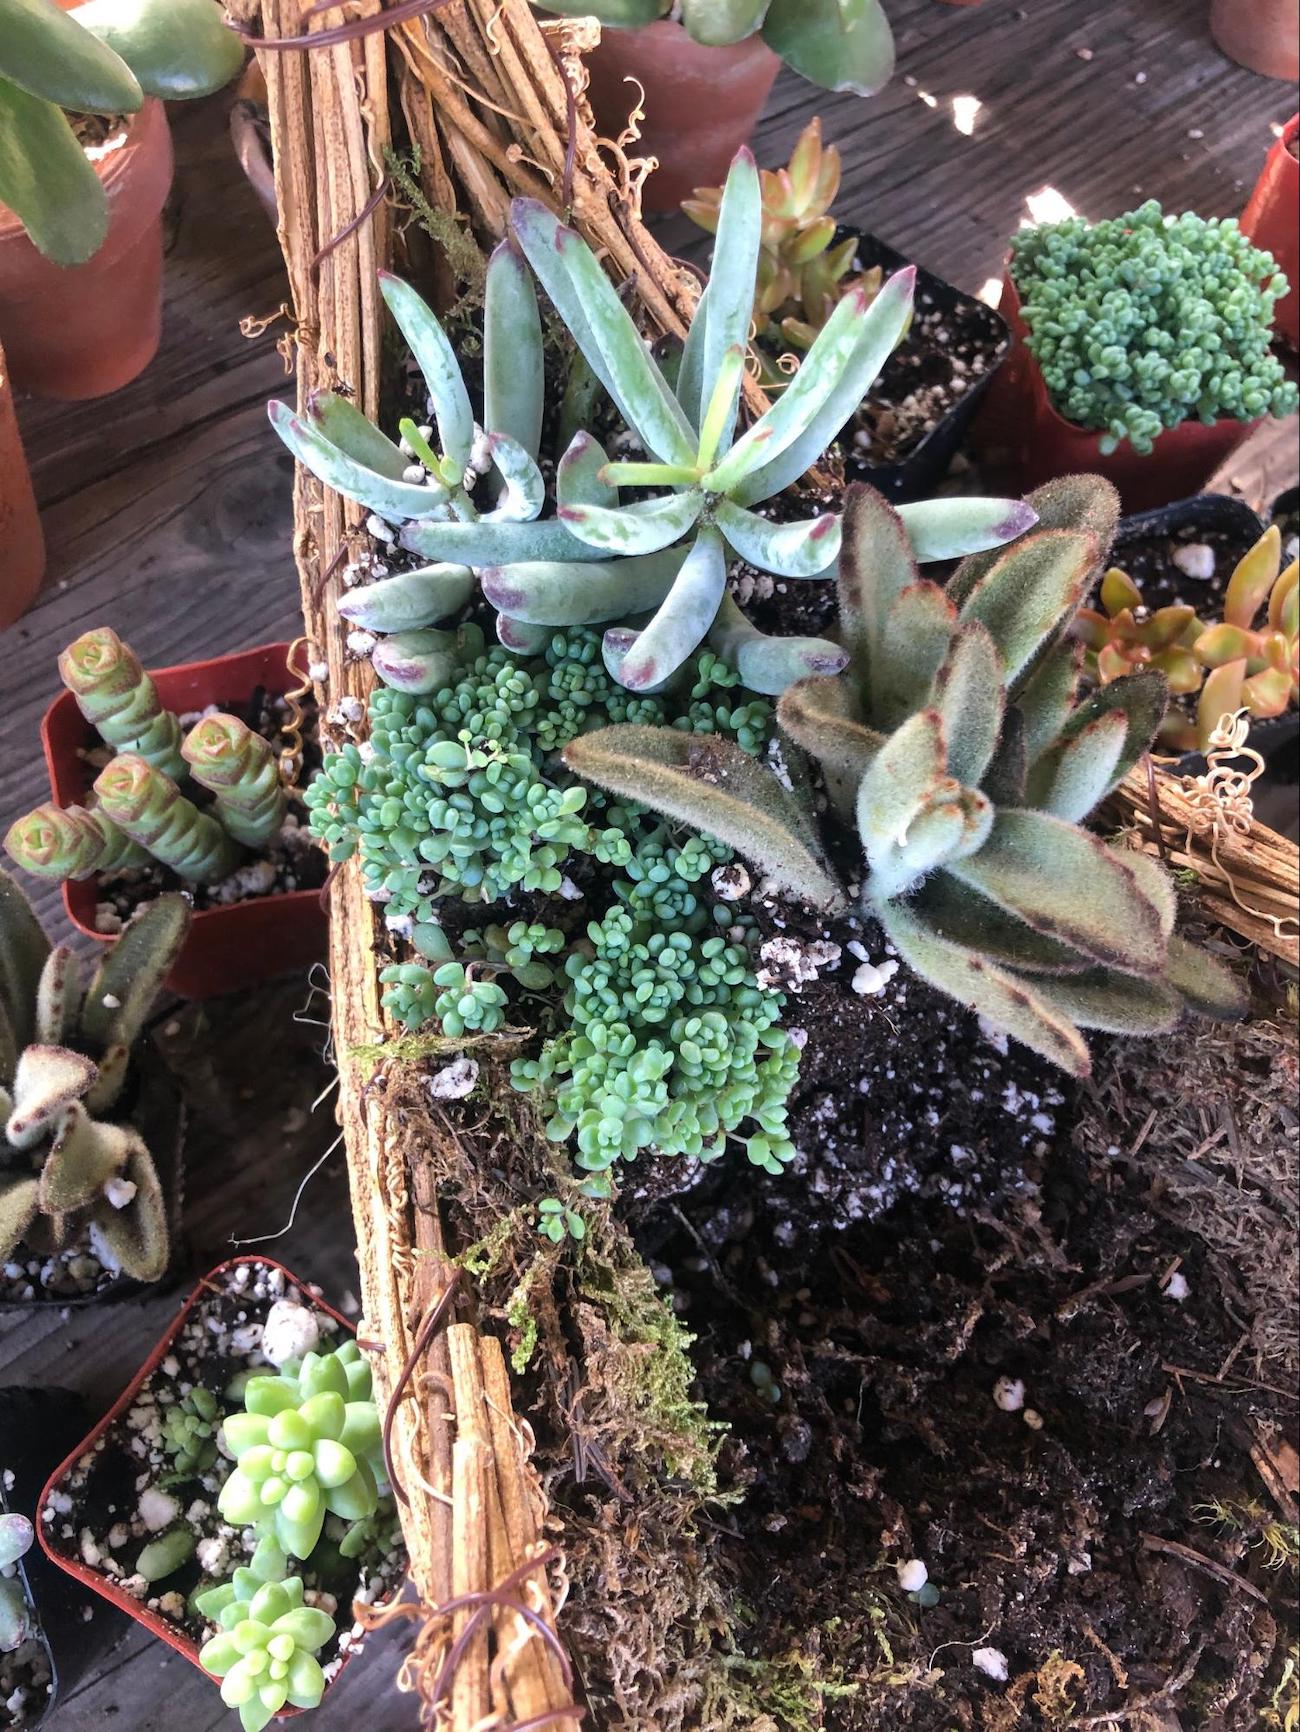 Add a variety of succulent textures, shapes and colors to cornucopia